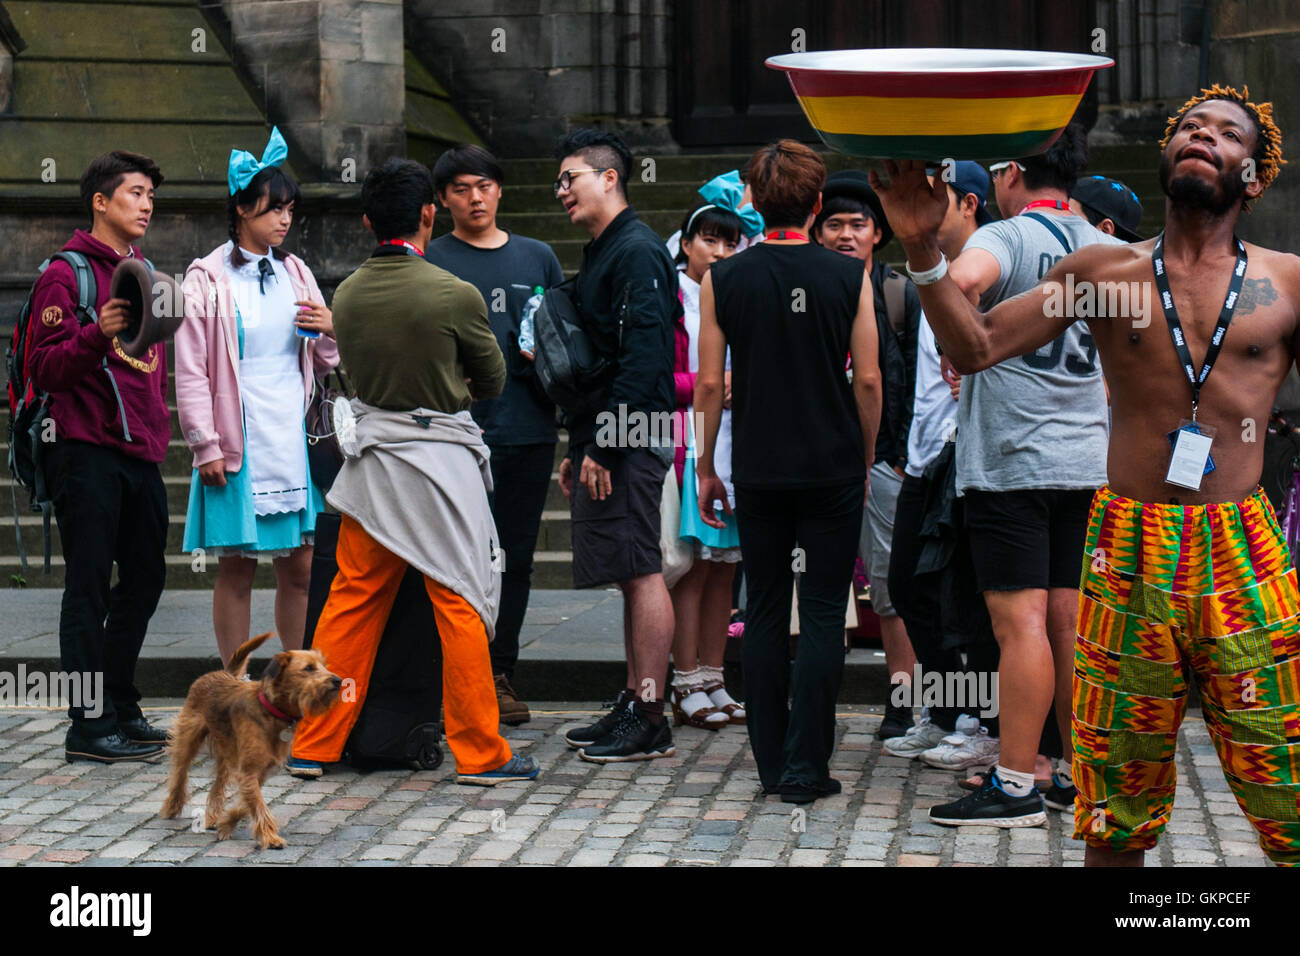 Edinburgh, Scotland. 22nd August, 2016. Performers train and speak after a day on the Royal Mile. The Edinburgh Festival Fringe is the largest performing arts festival in the world, this year's festival hosts more than 3000 shows in nearly 300 venues across the city. Credit:  Simone Padovani / Awakening / Alamy Live News Stock Photo